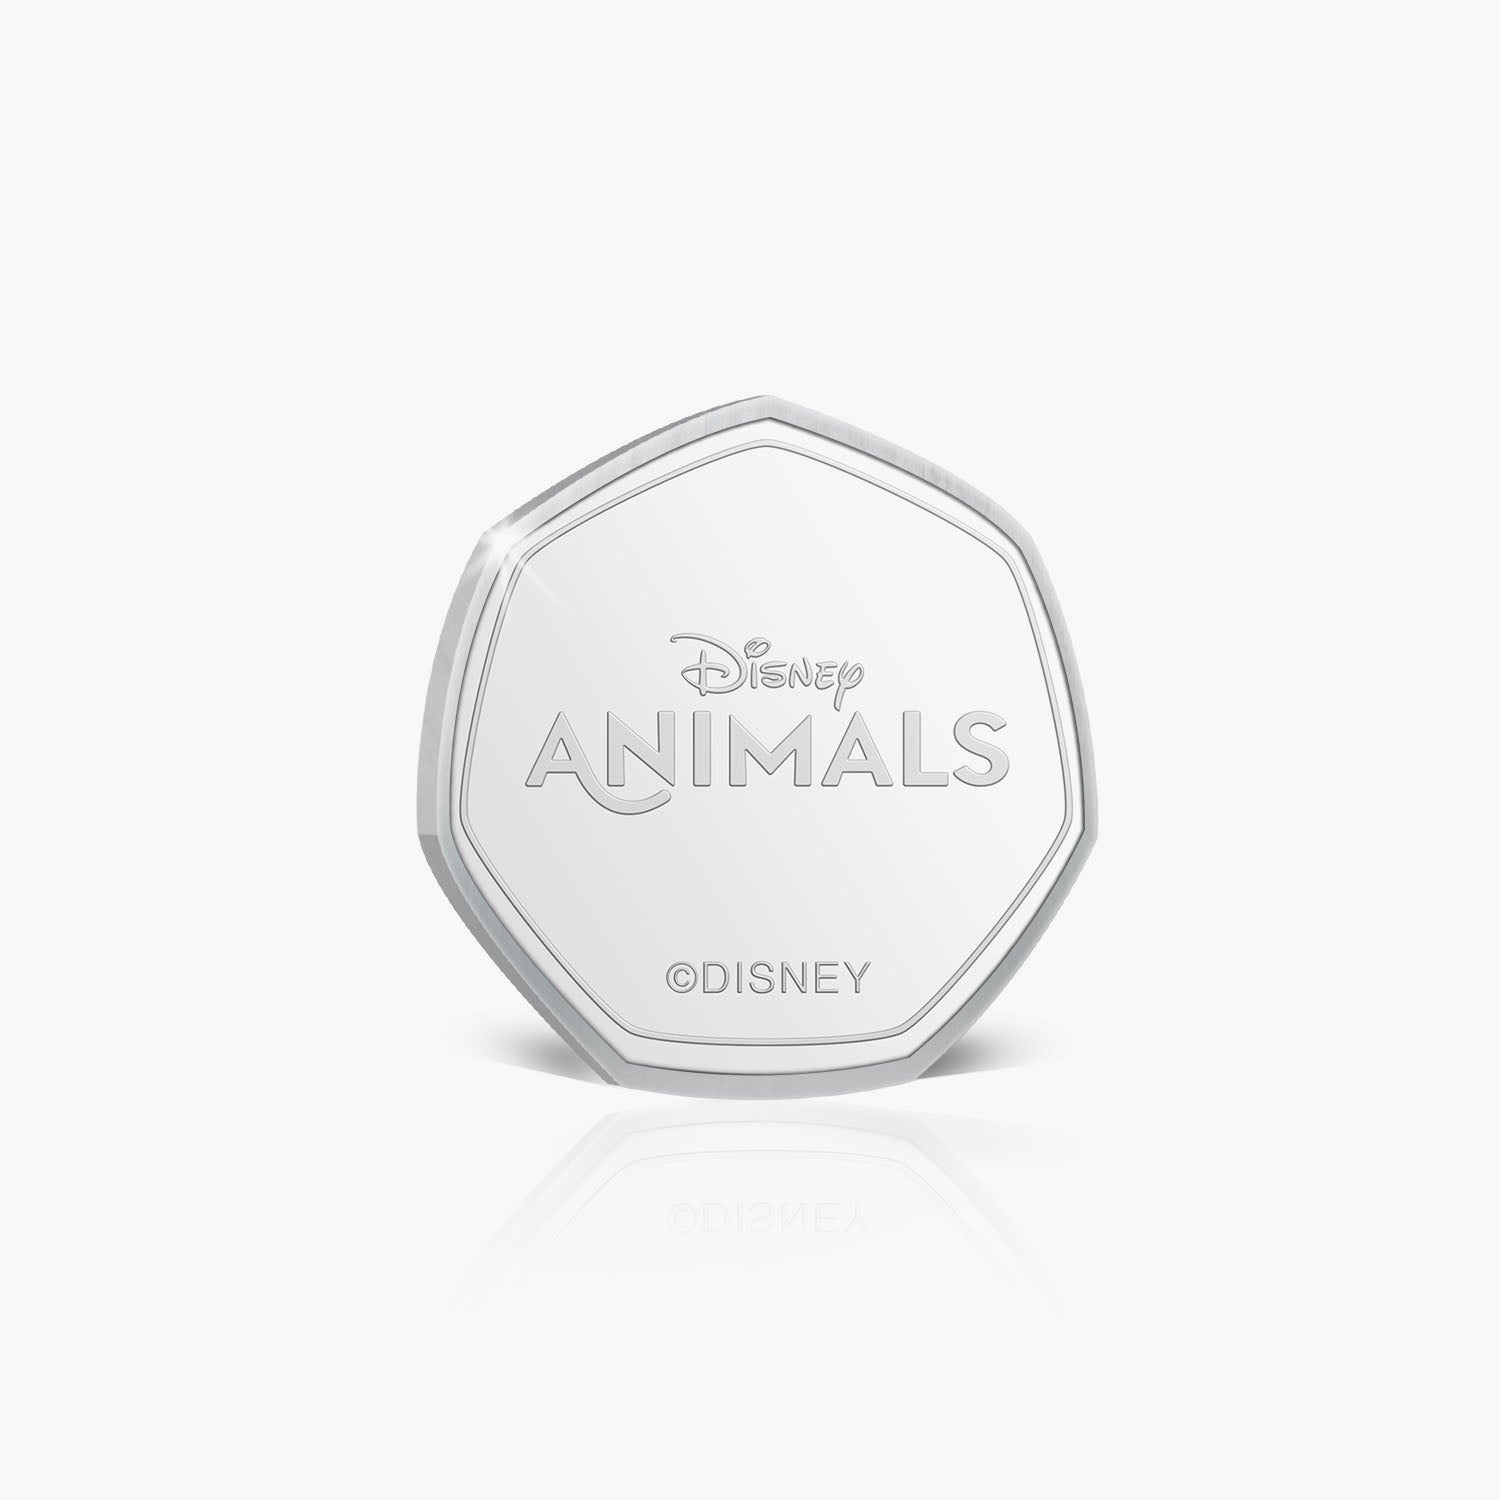 The Official Disney Animals Collection